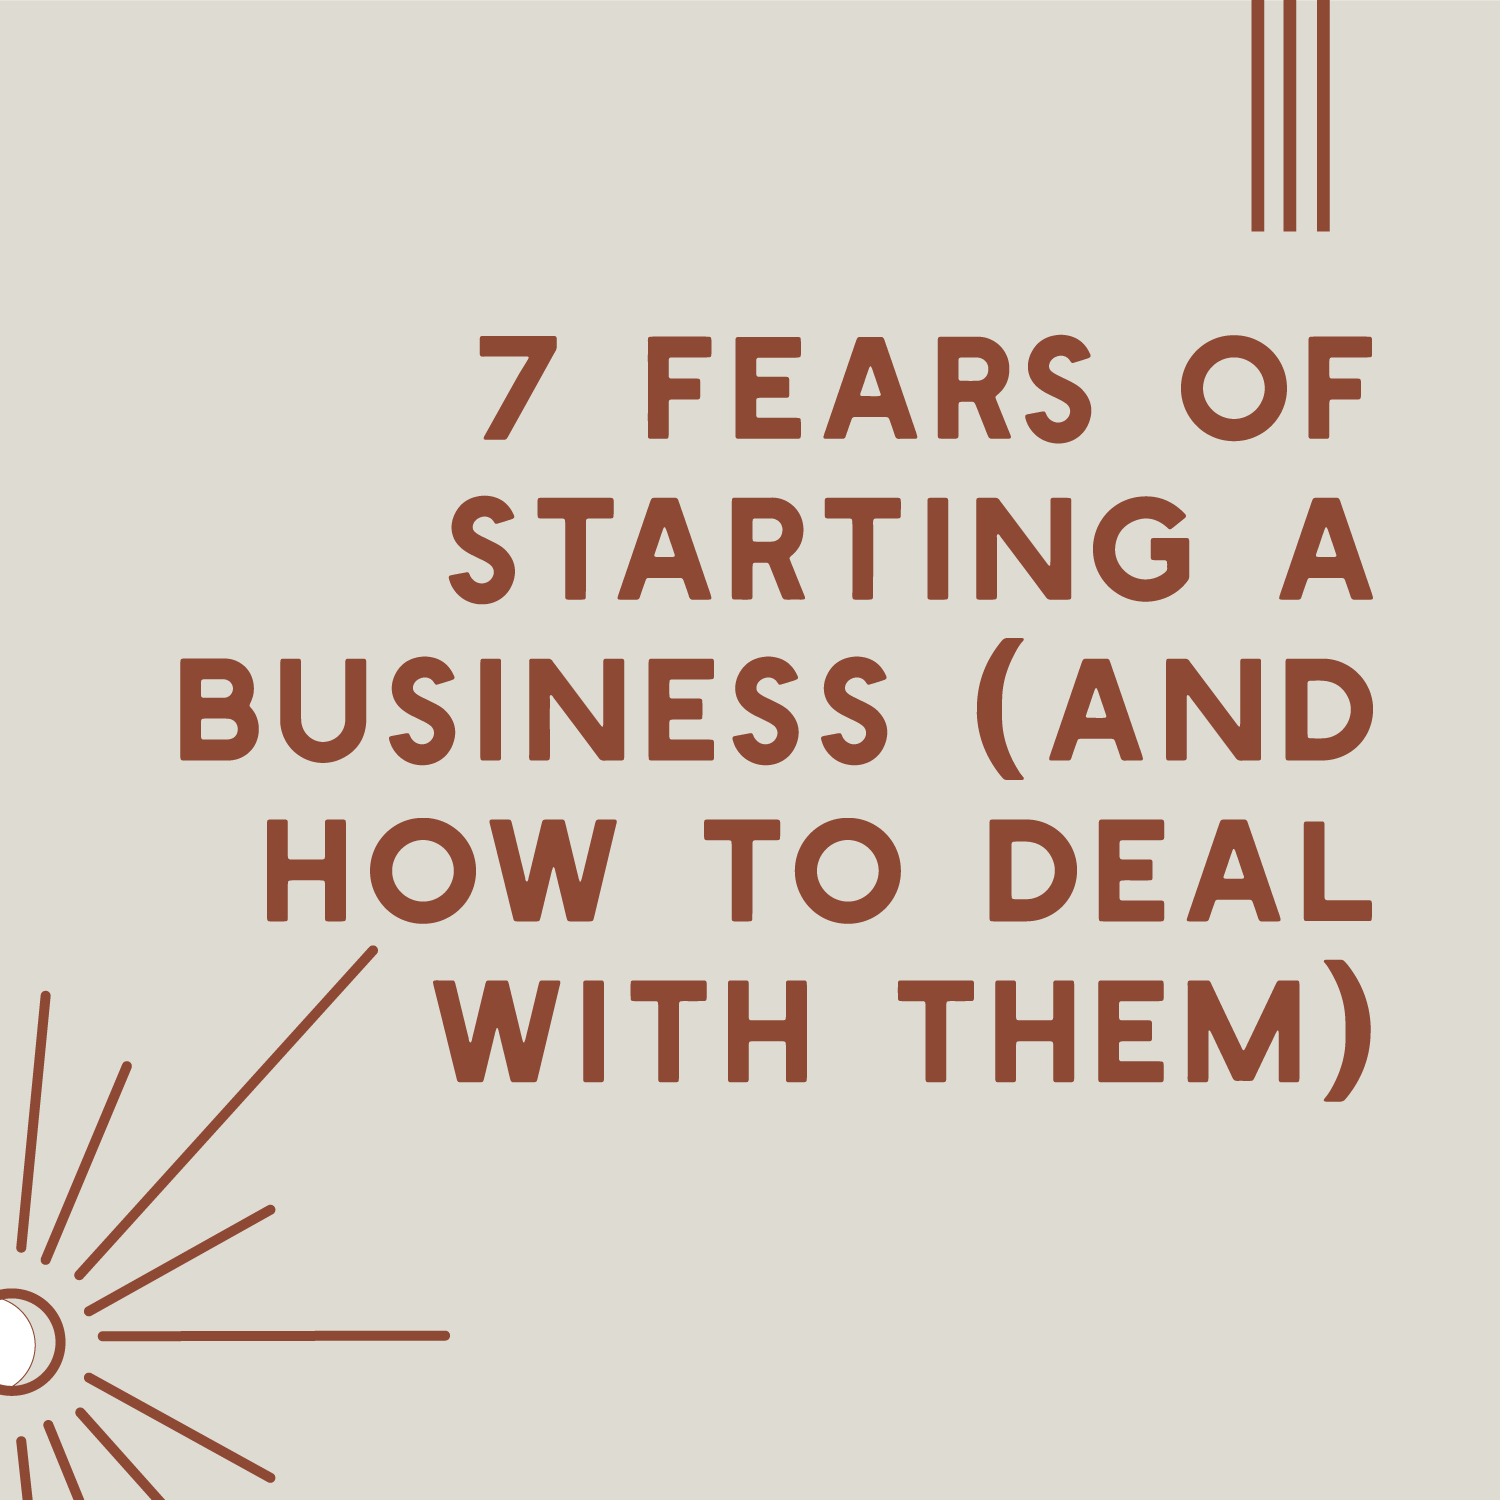 7 Fears Of Starting A Business & How To Deal With Them